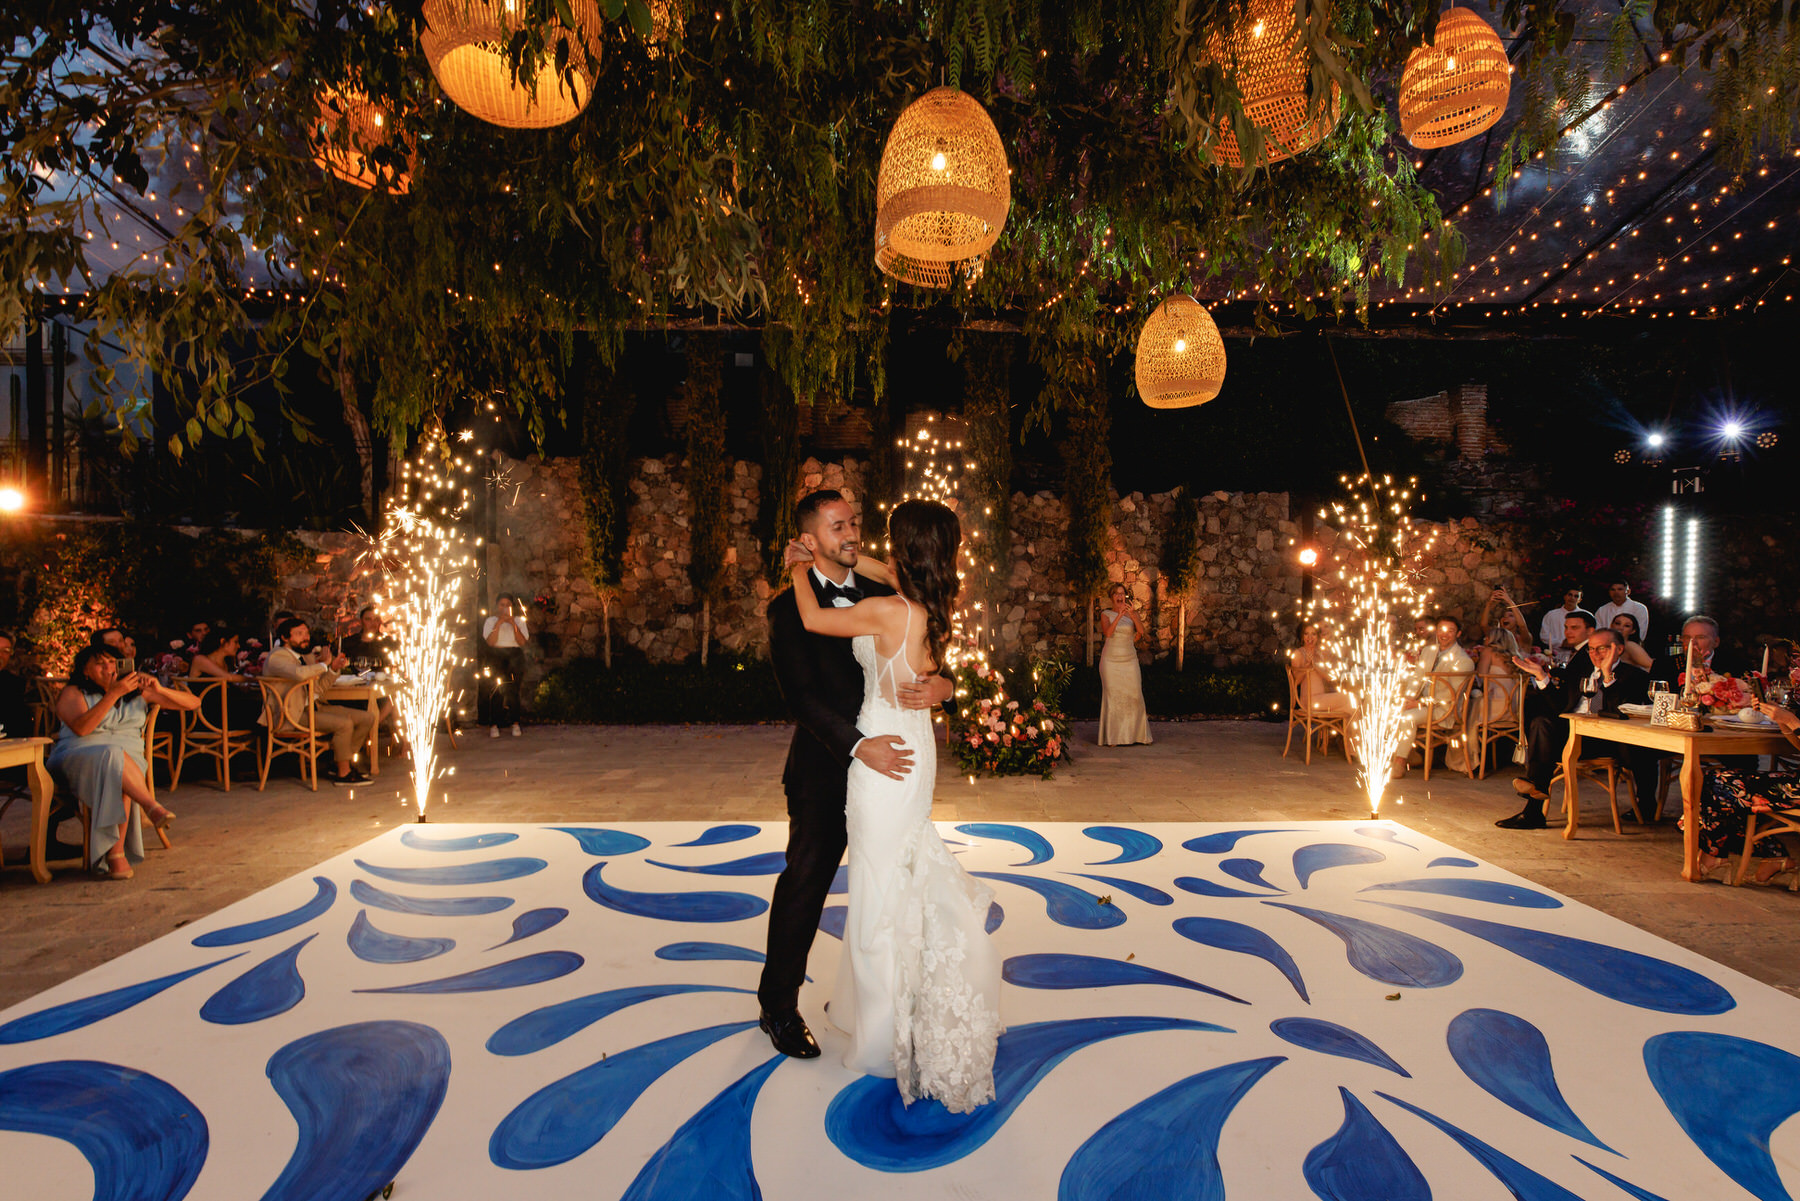 First dance wedding in Mexico